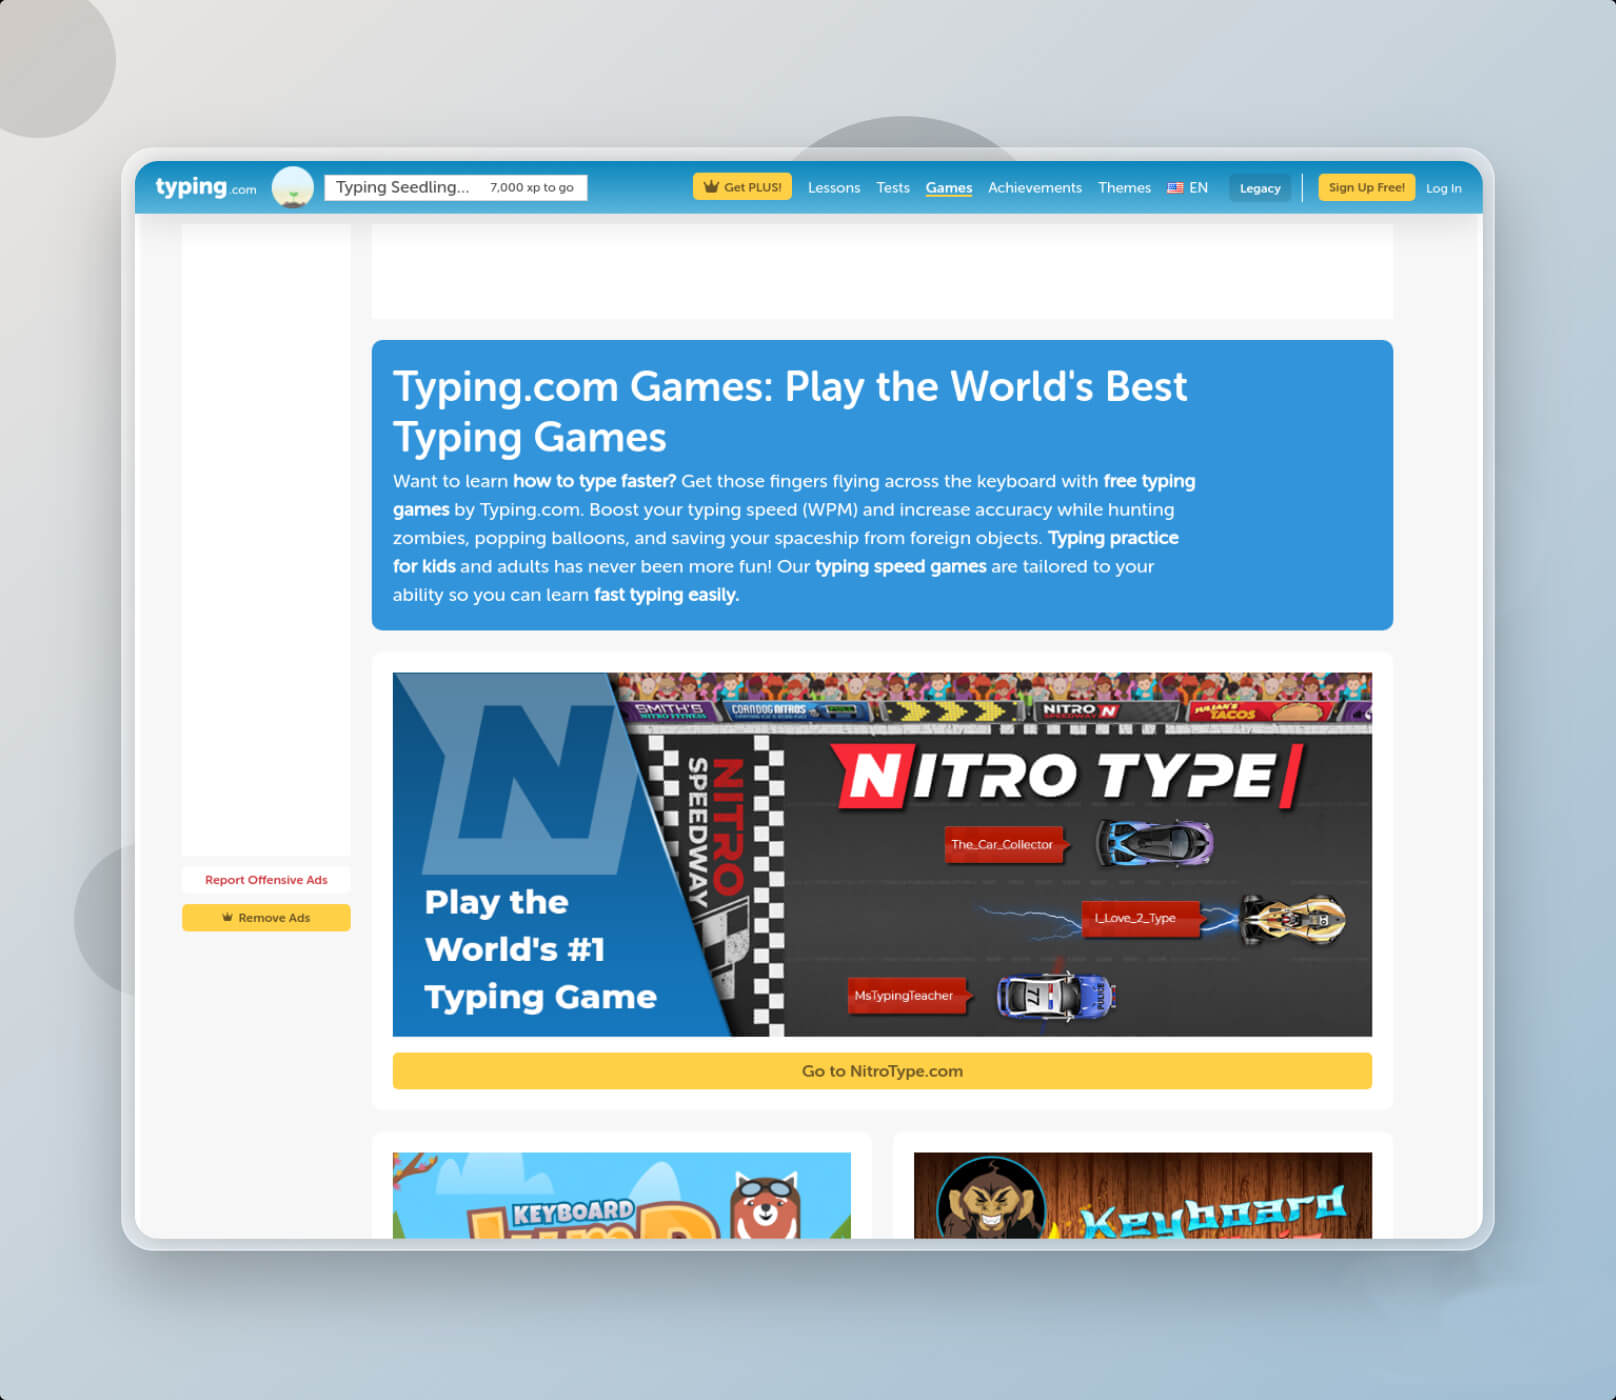 Top 8 Typing Games You Can Play for Free